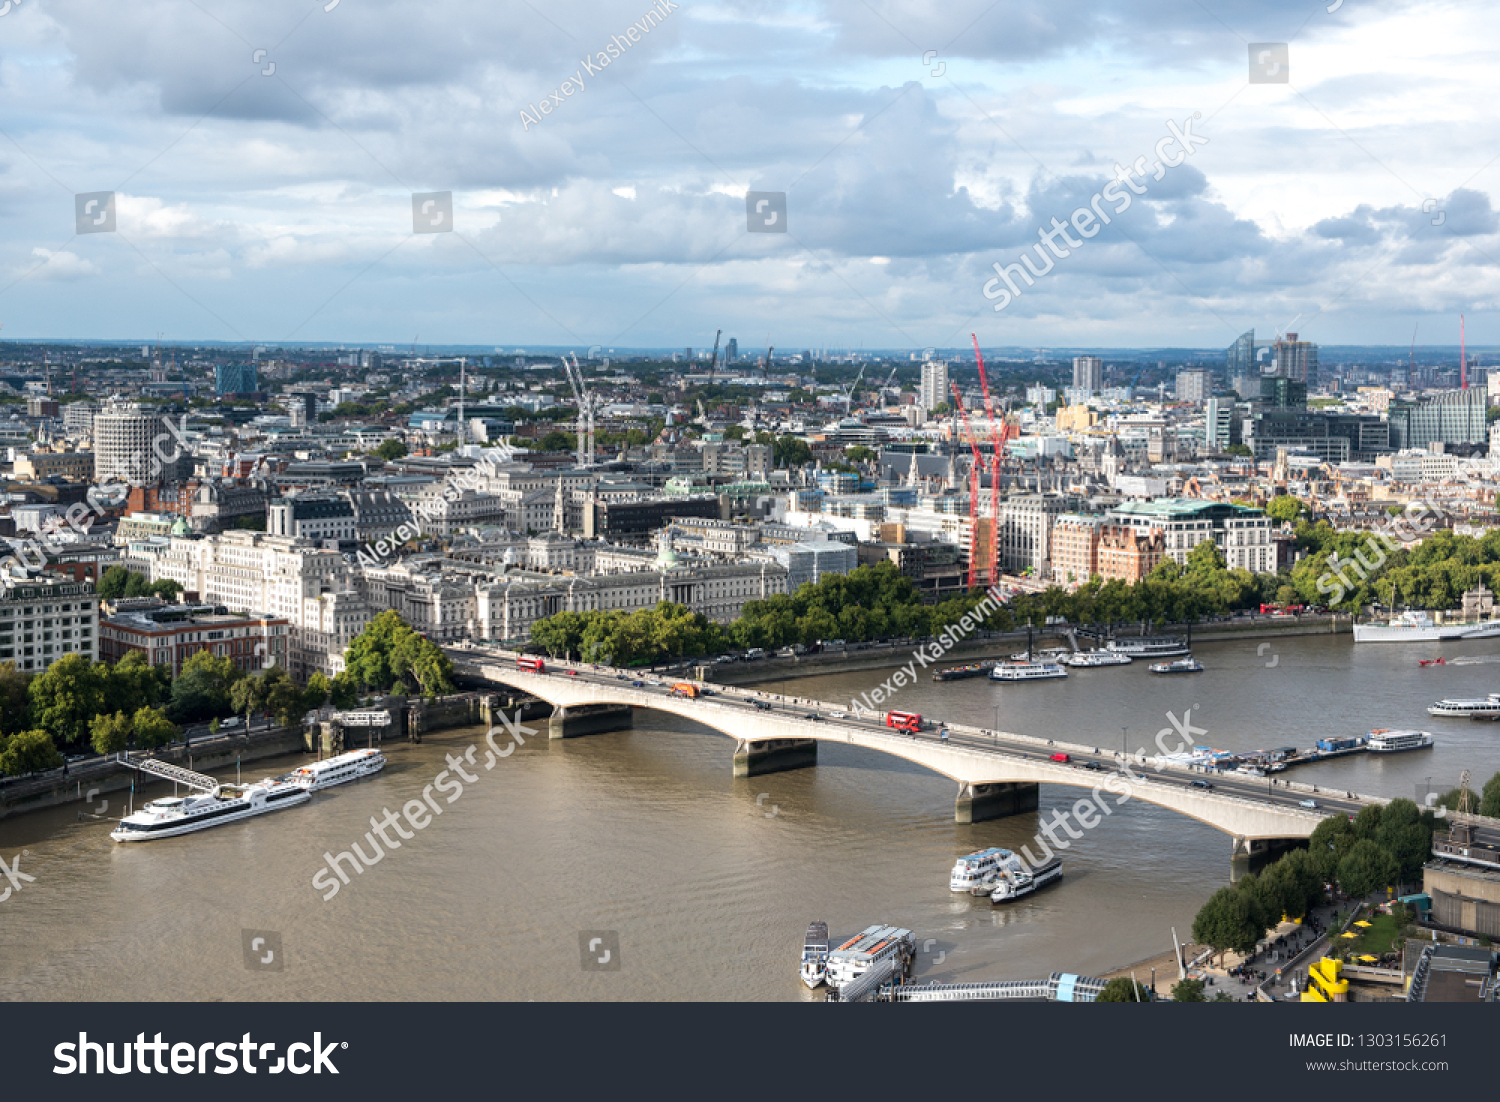 Thames river and city buildings in London in cloudly day, United Kingdom #1303156261